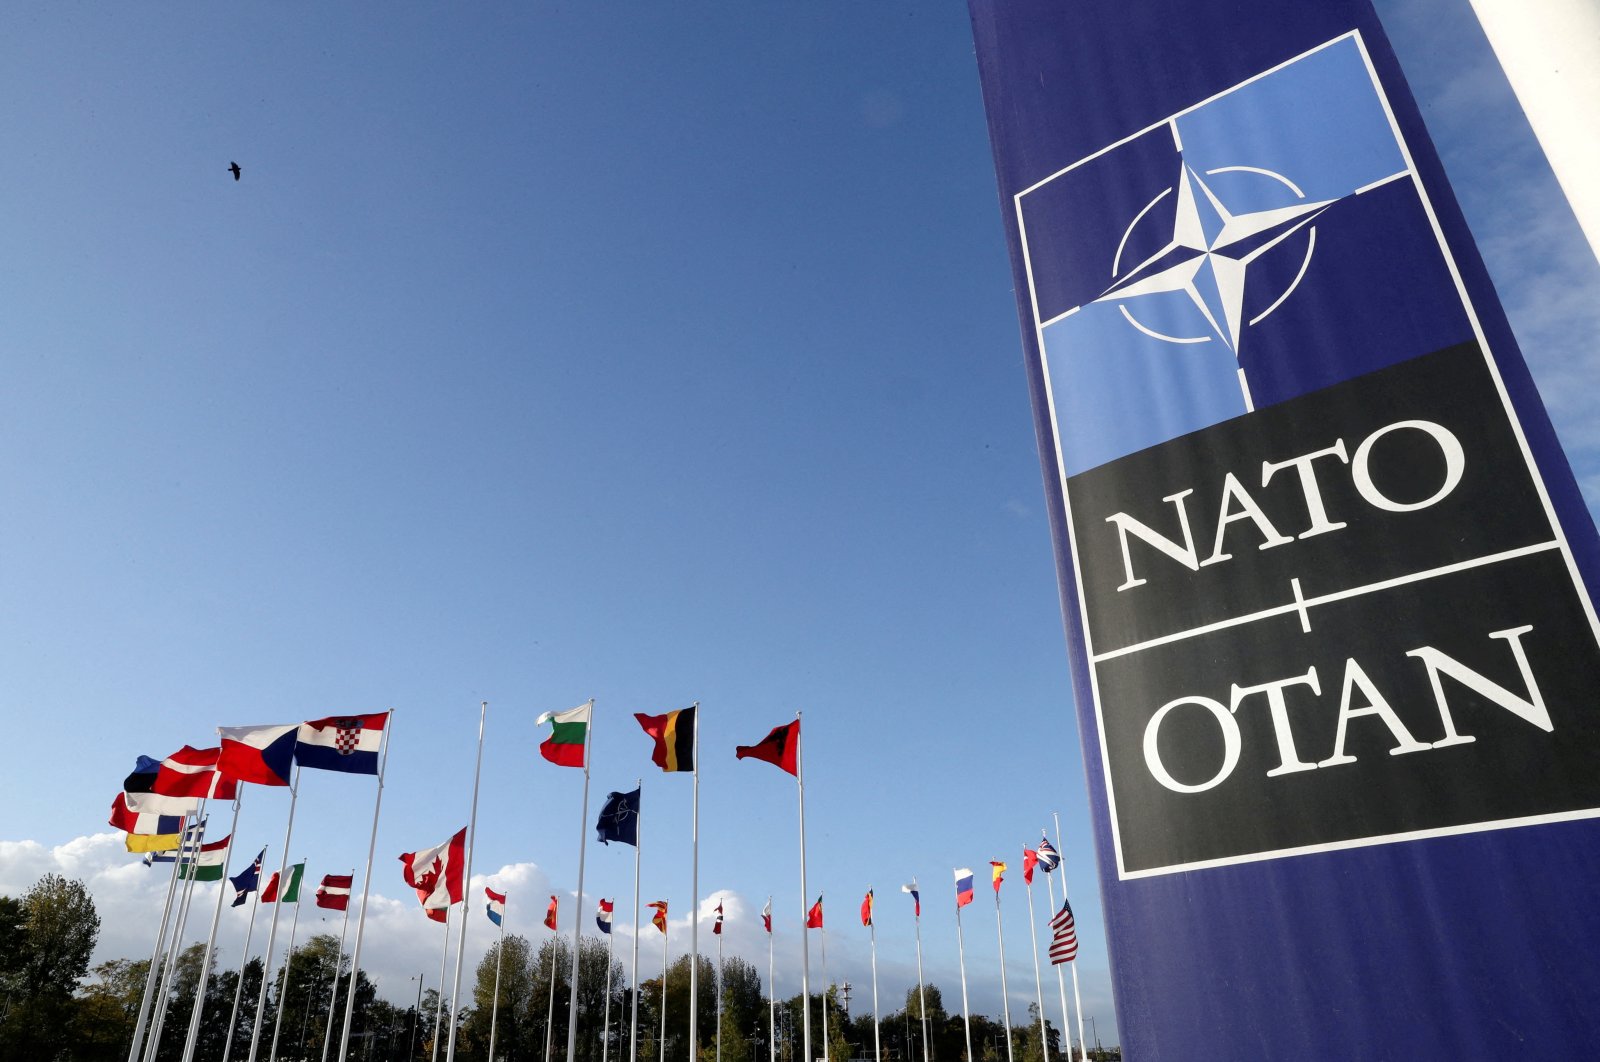 Flags wave outside the alliance headquarters ahead of a NATO defense ministers meeting, in Brussels, Belgium, Oct. 21, 2021. (REUTERS)